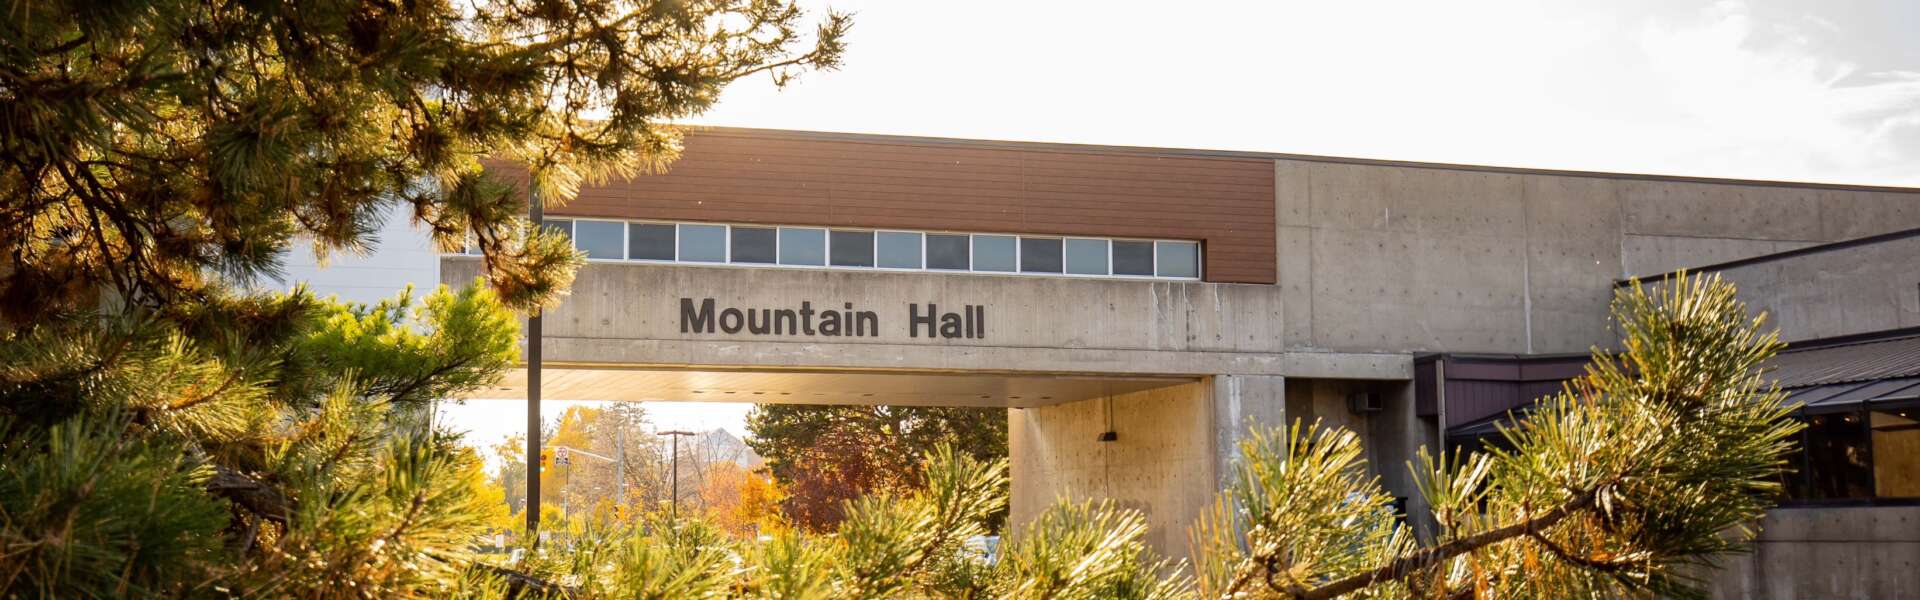 the sign for Mountain Hall residence is shown between pine tree branches